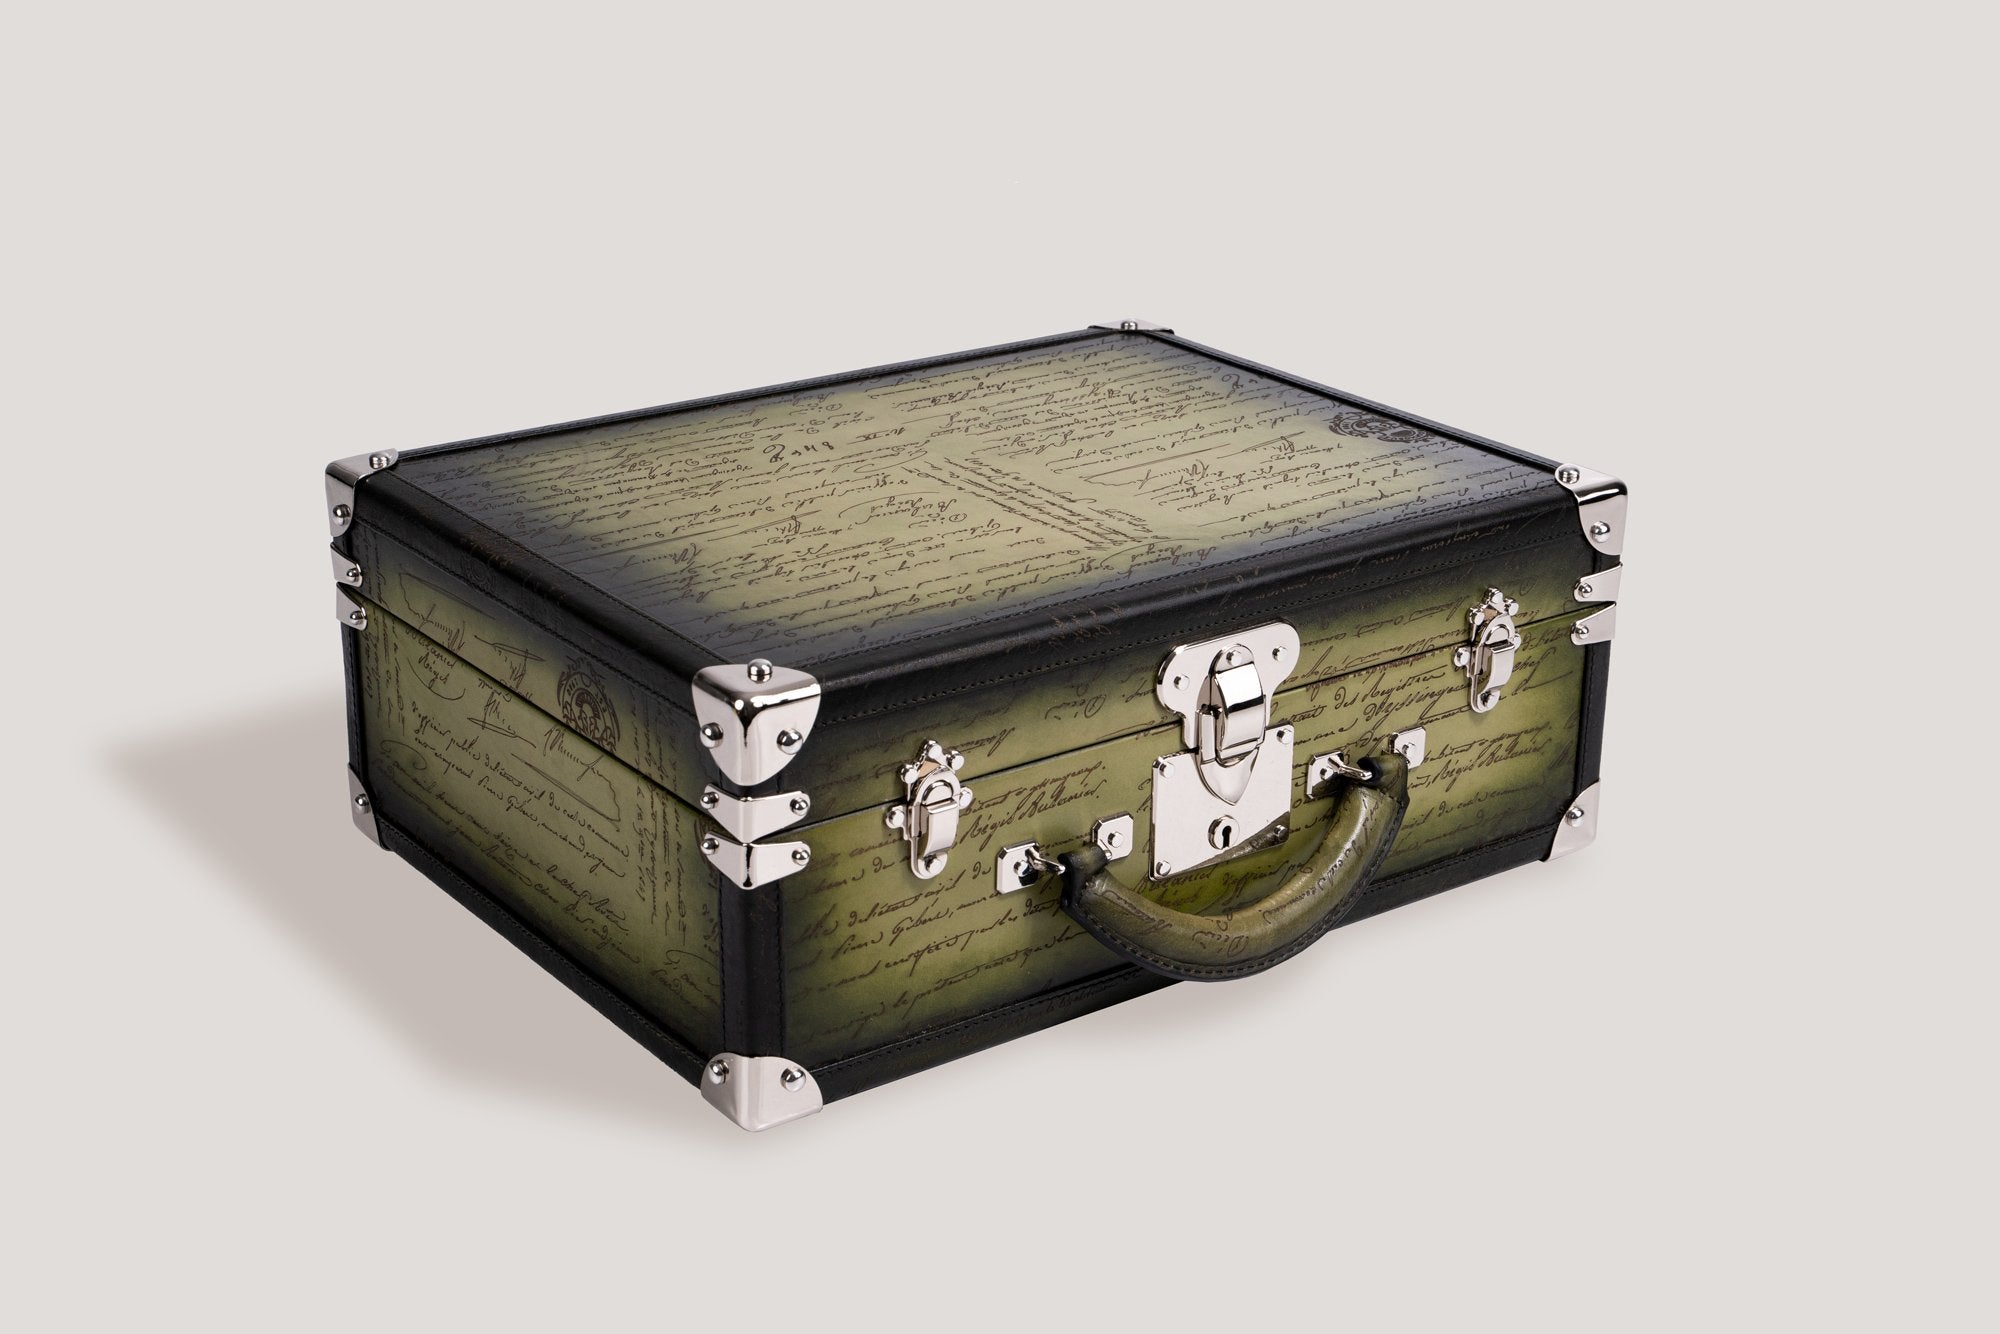 Bosphorus LeatherWatch Trunk - Parchment Patina Olive Green for 30 Watches